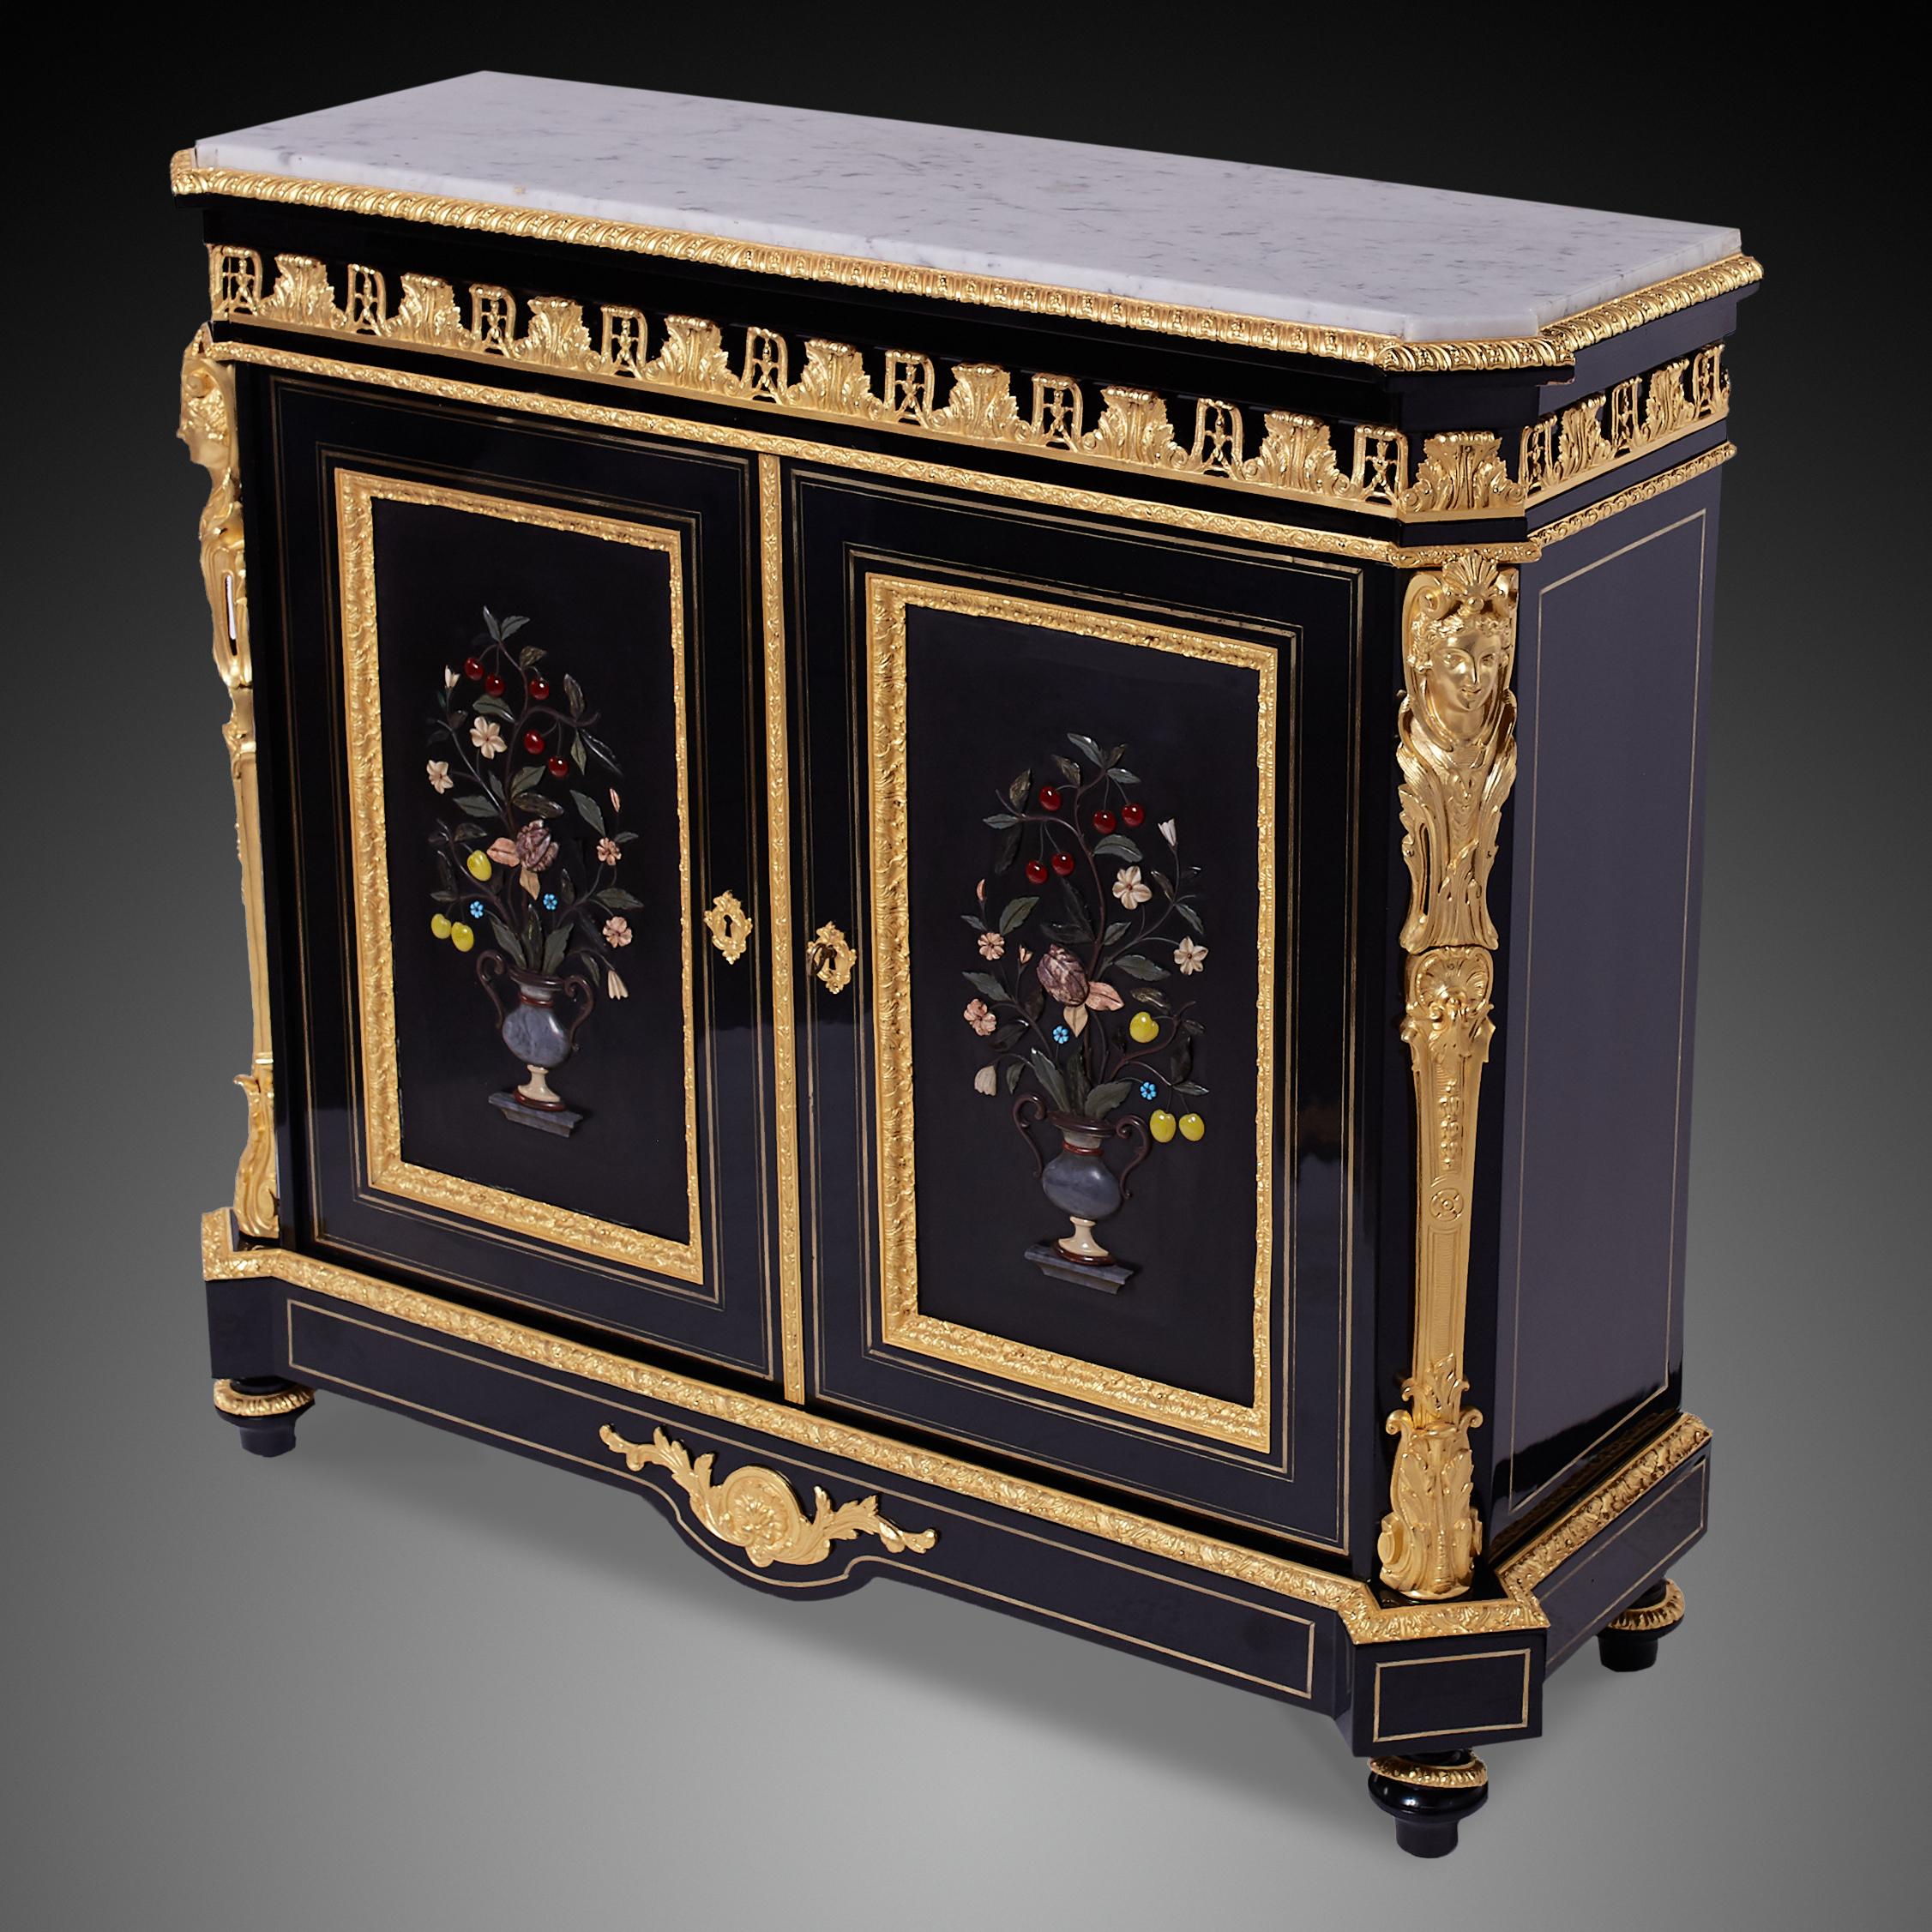 French bronze-mounted Ebonized and Pietra Dura cabinet
Empire style ormolu and Pietra dura cabinet from 19th c.

Napoleon III ormolu veneered ebony cabinet in Second Empire style by . In the 19th century, the Empire style prevailed in the years